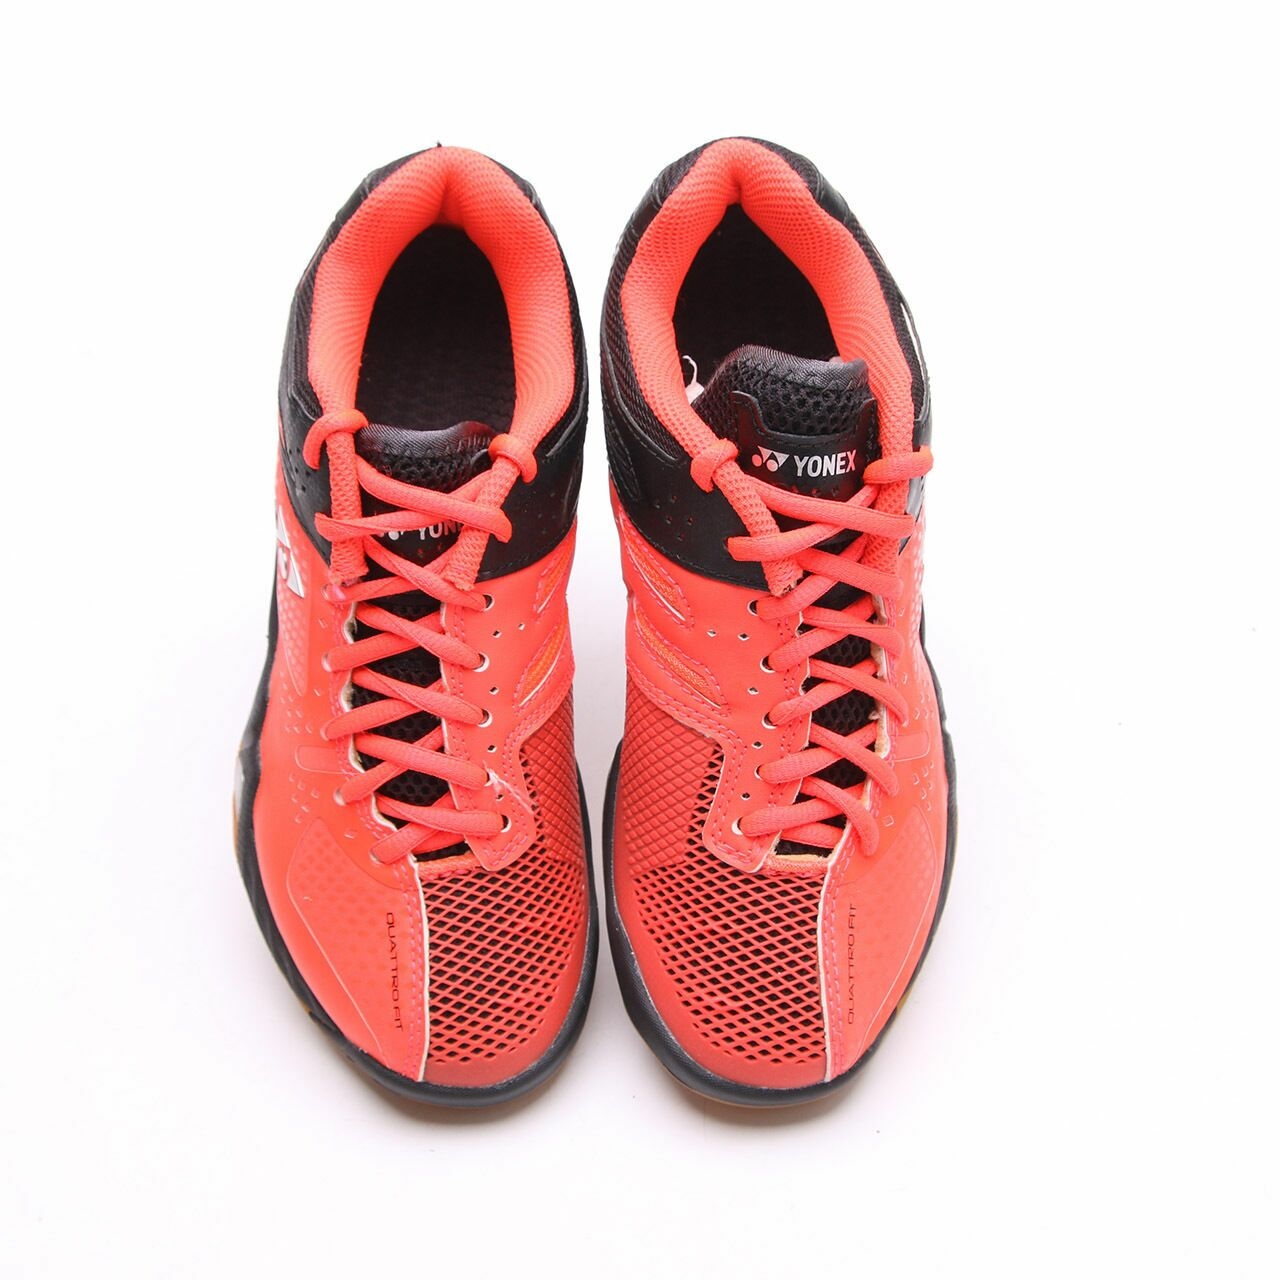 Yonex Bright Red Sneakers